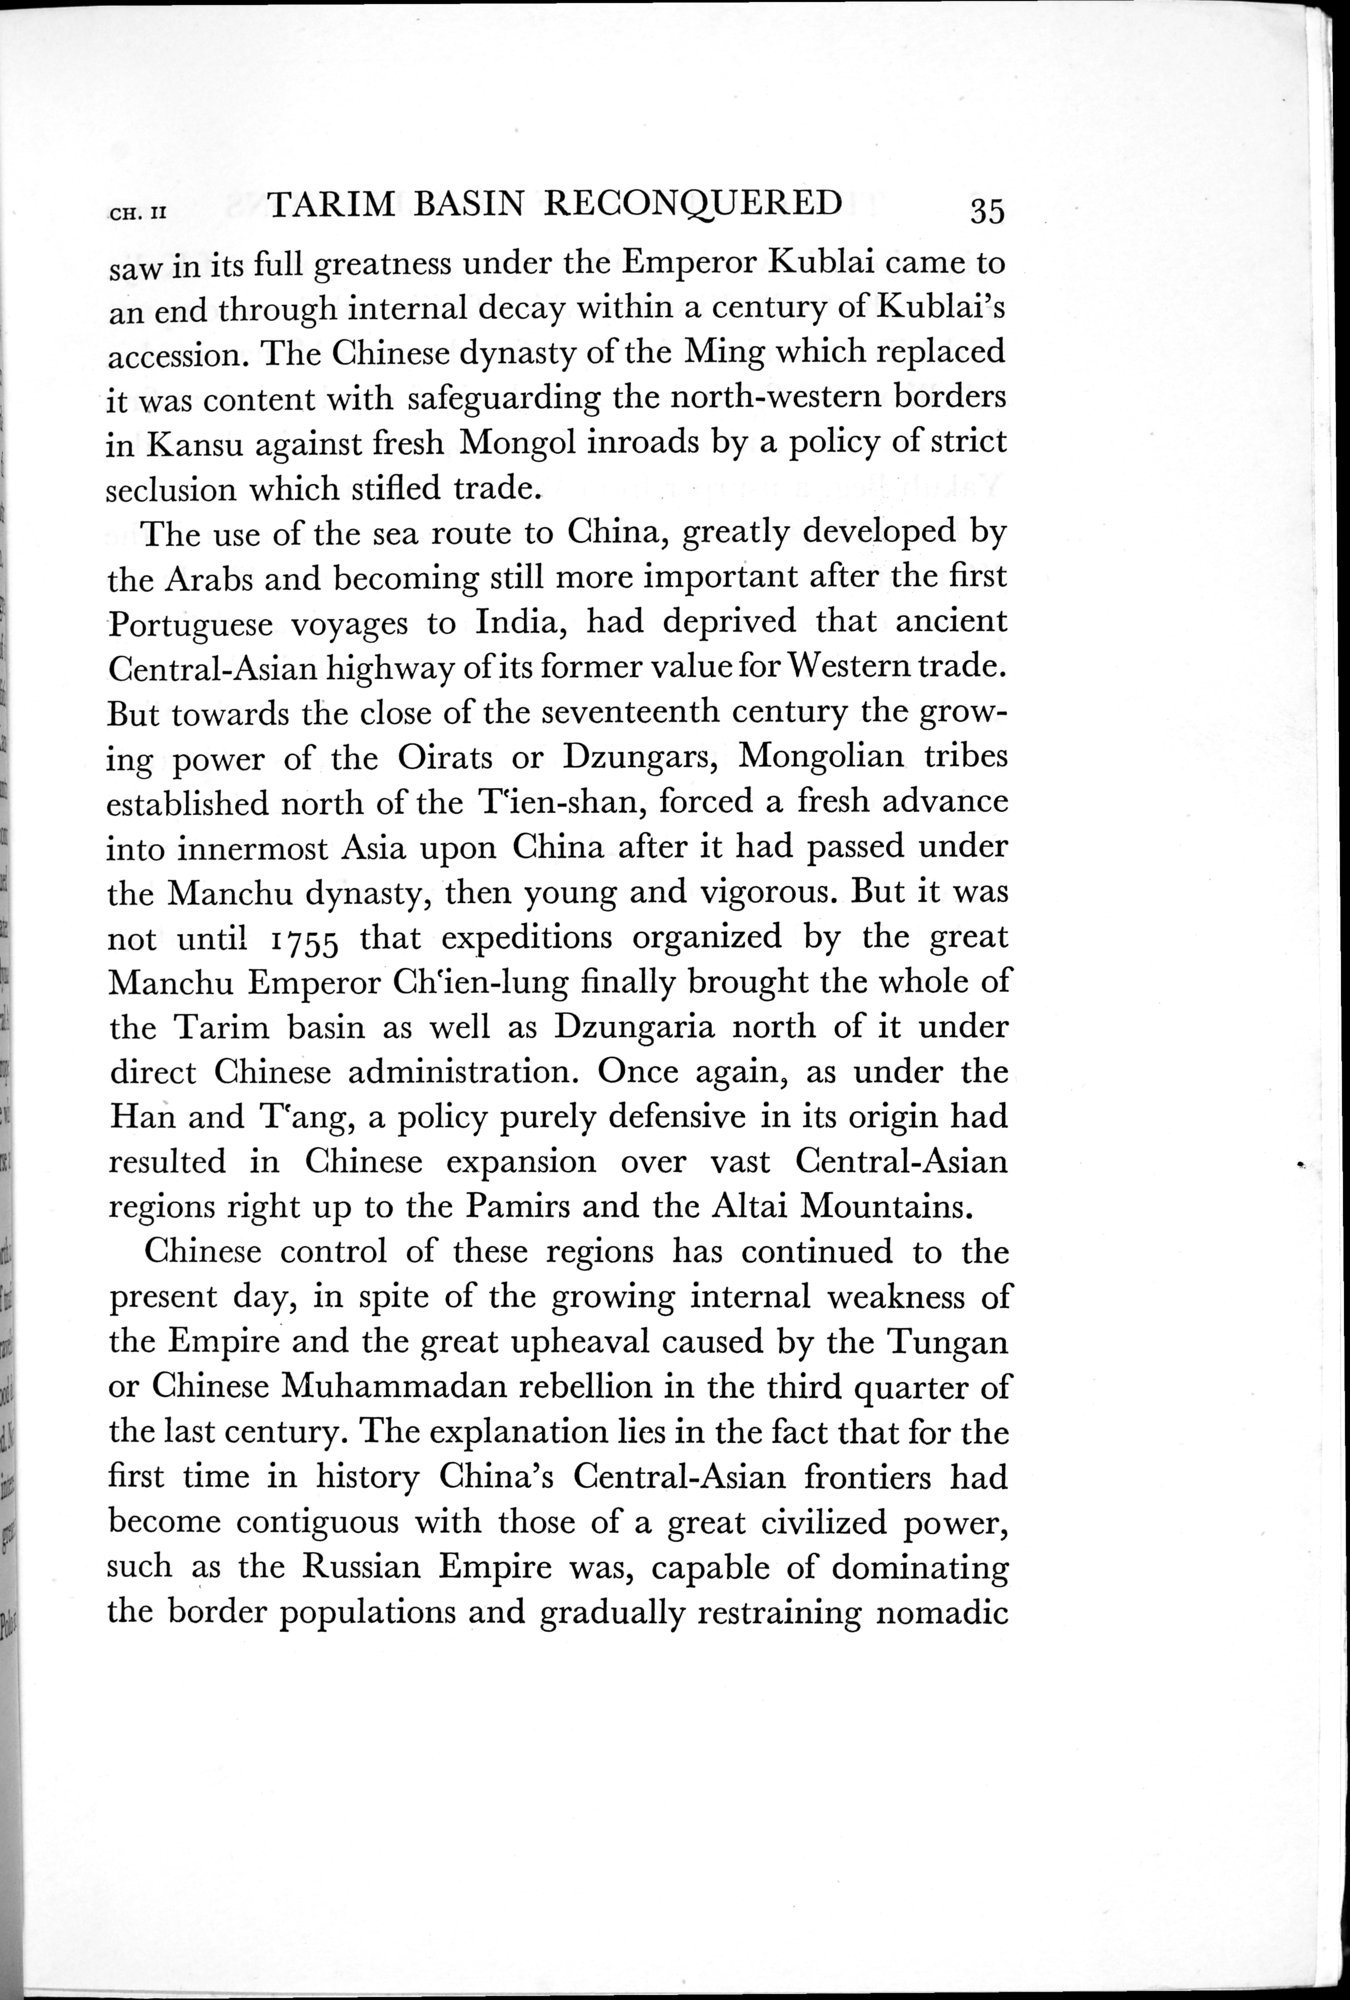 On Ancient Central-Asian Tracks : vol.1 / Page 81 (Grayscale High Resolution Image)